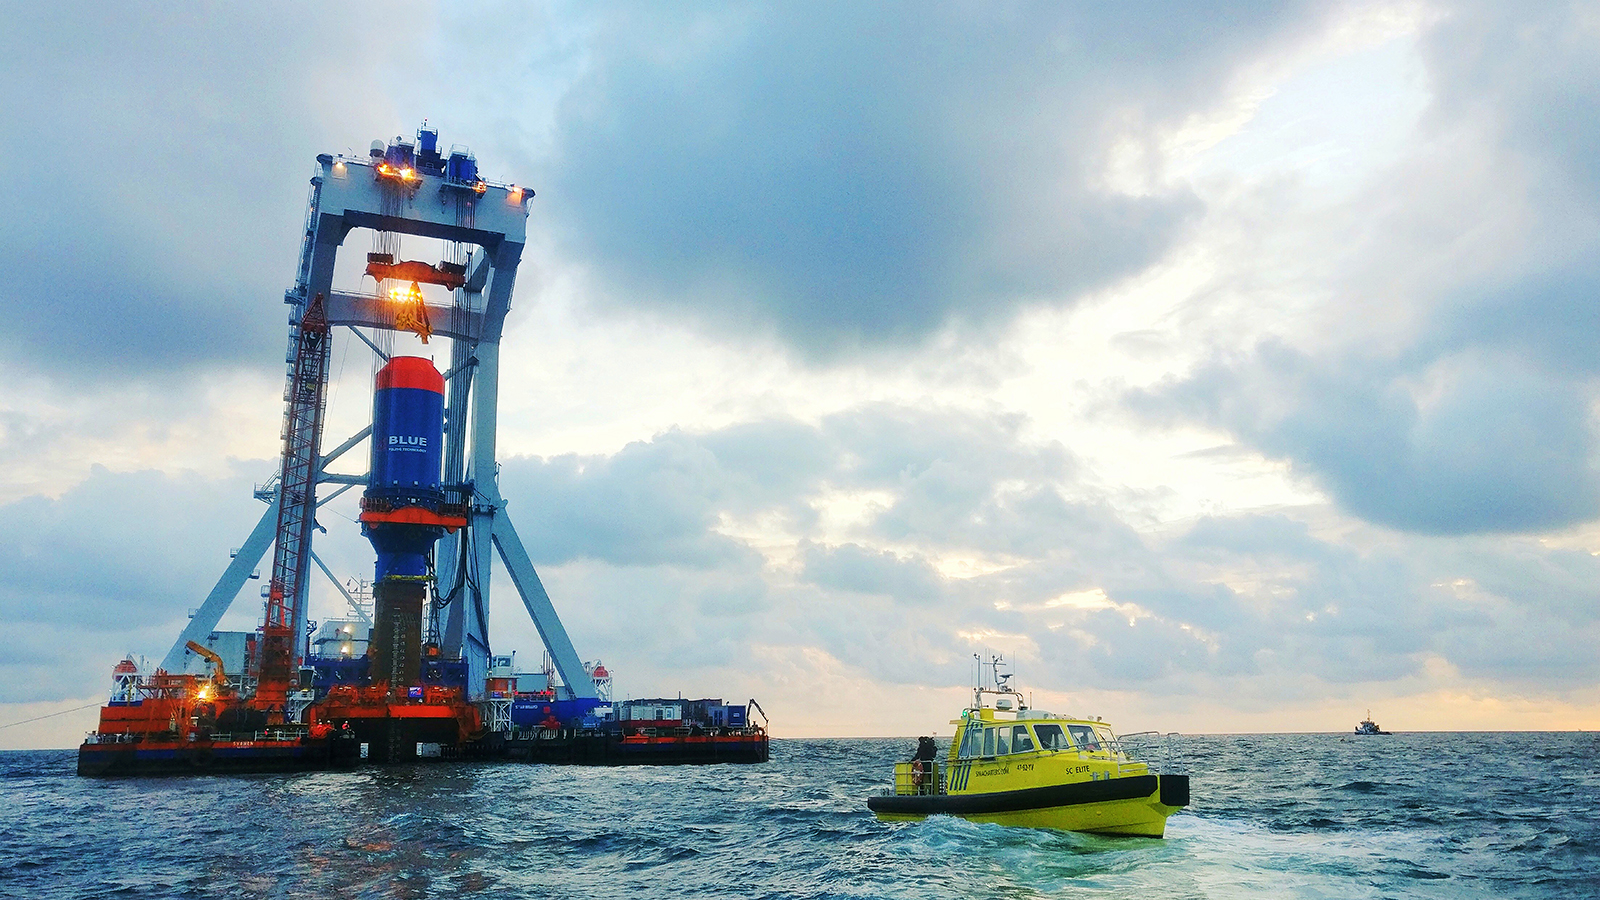 BLUE Piling Technology Enters New Testing Phase